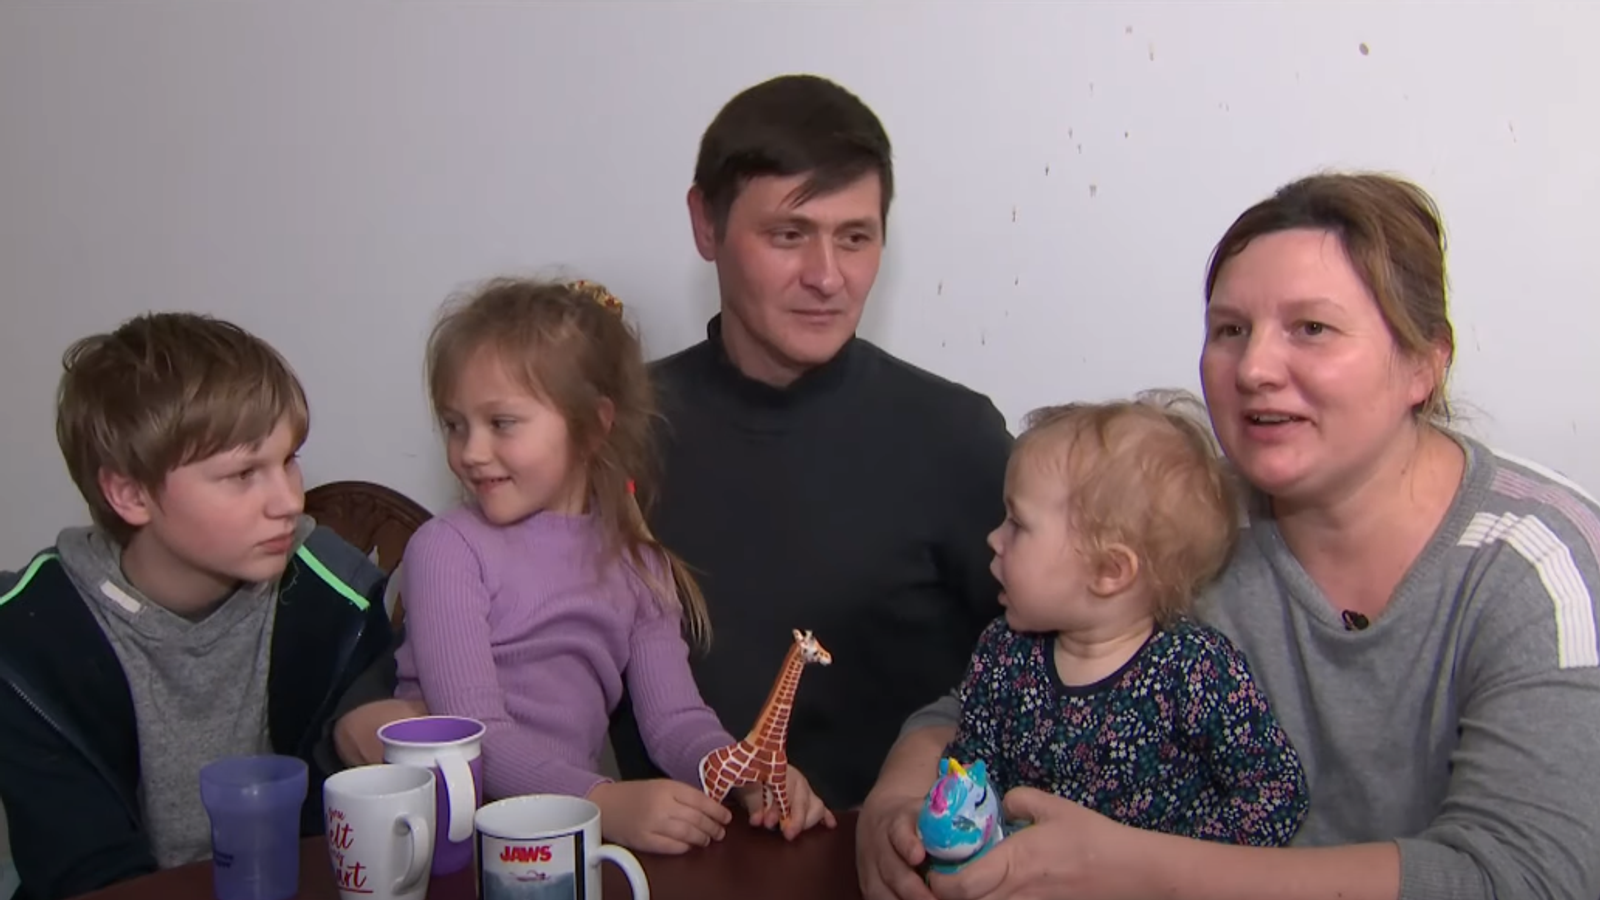 'i miss our roots': ukrainians on what the refugee scheme extension means for them